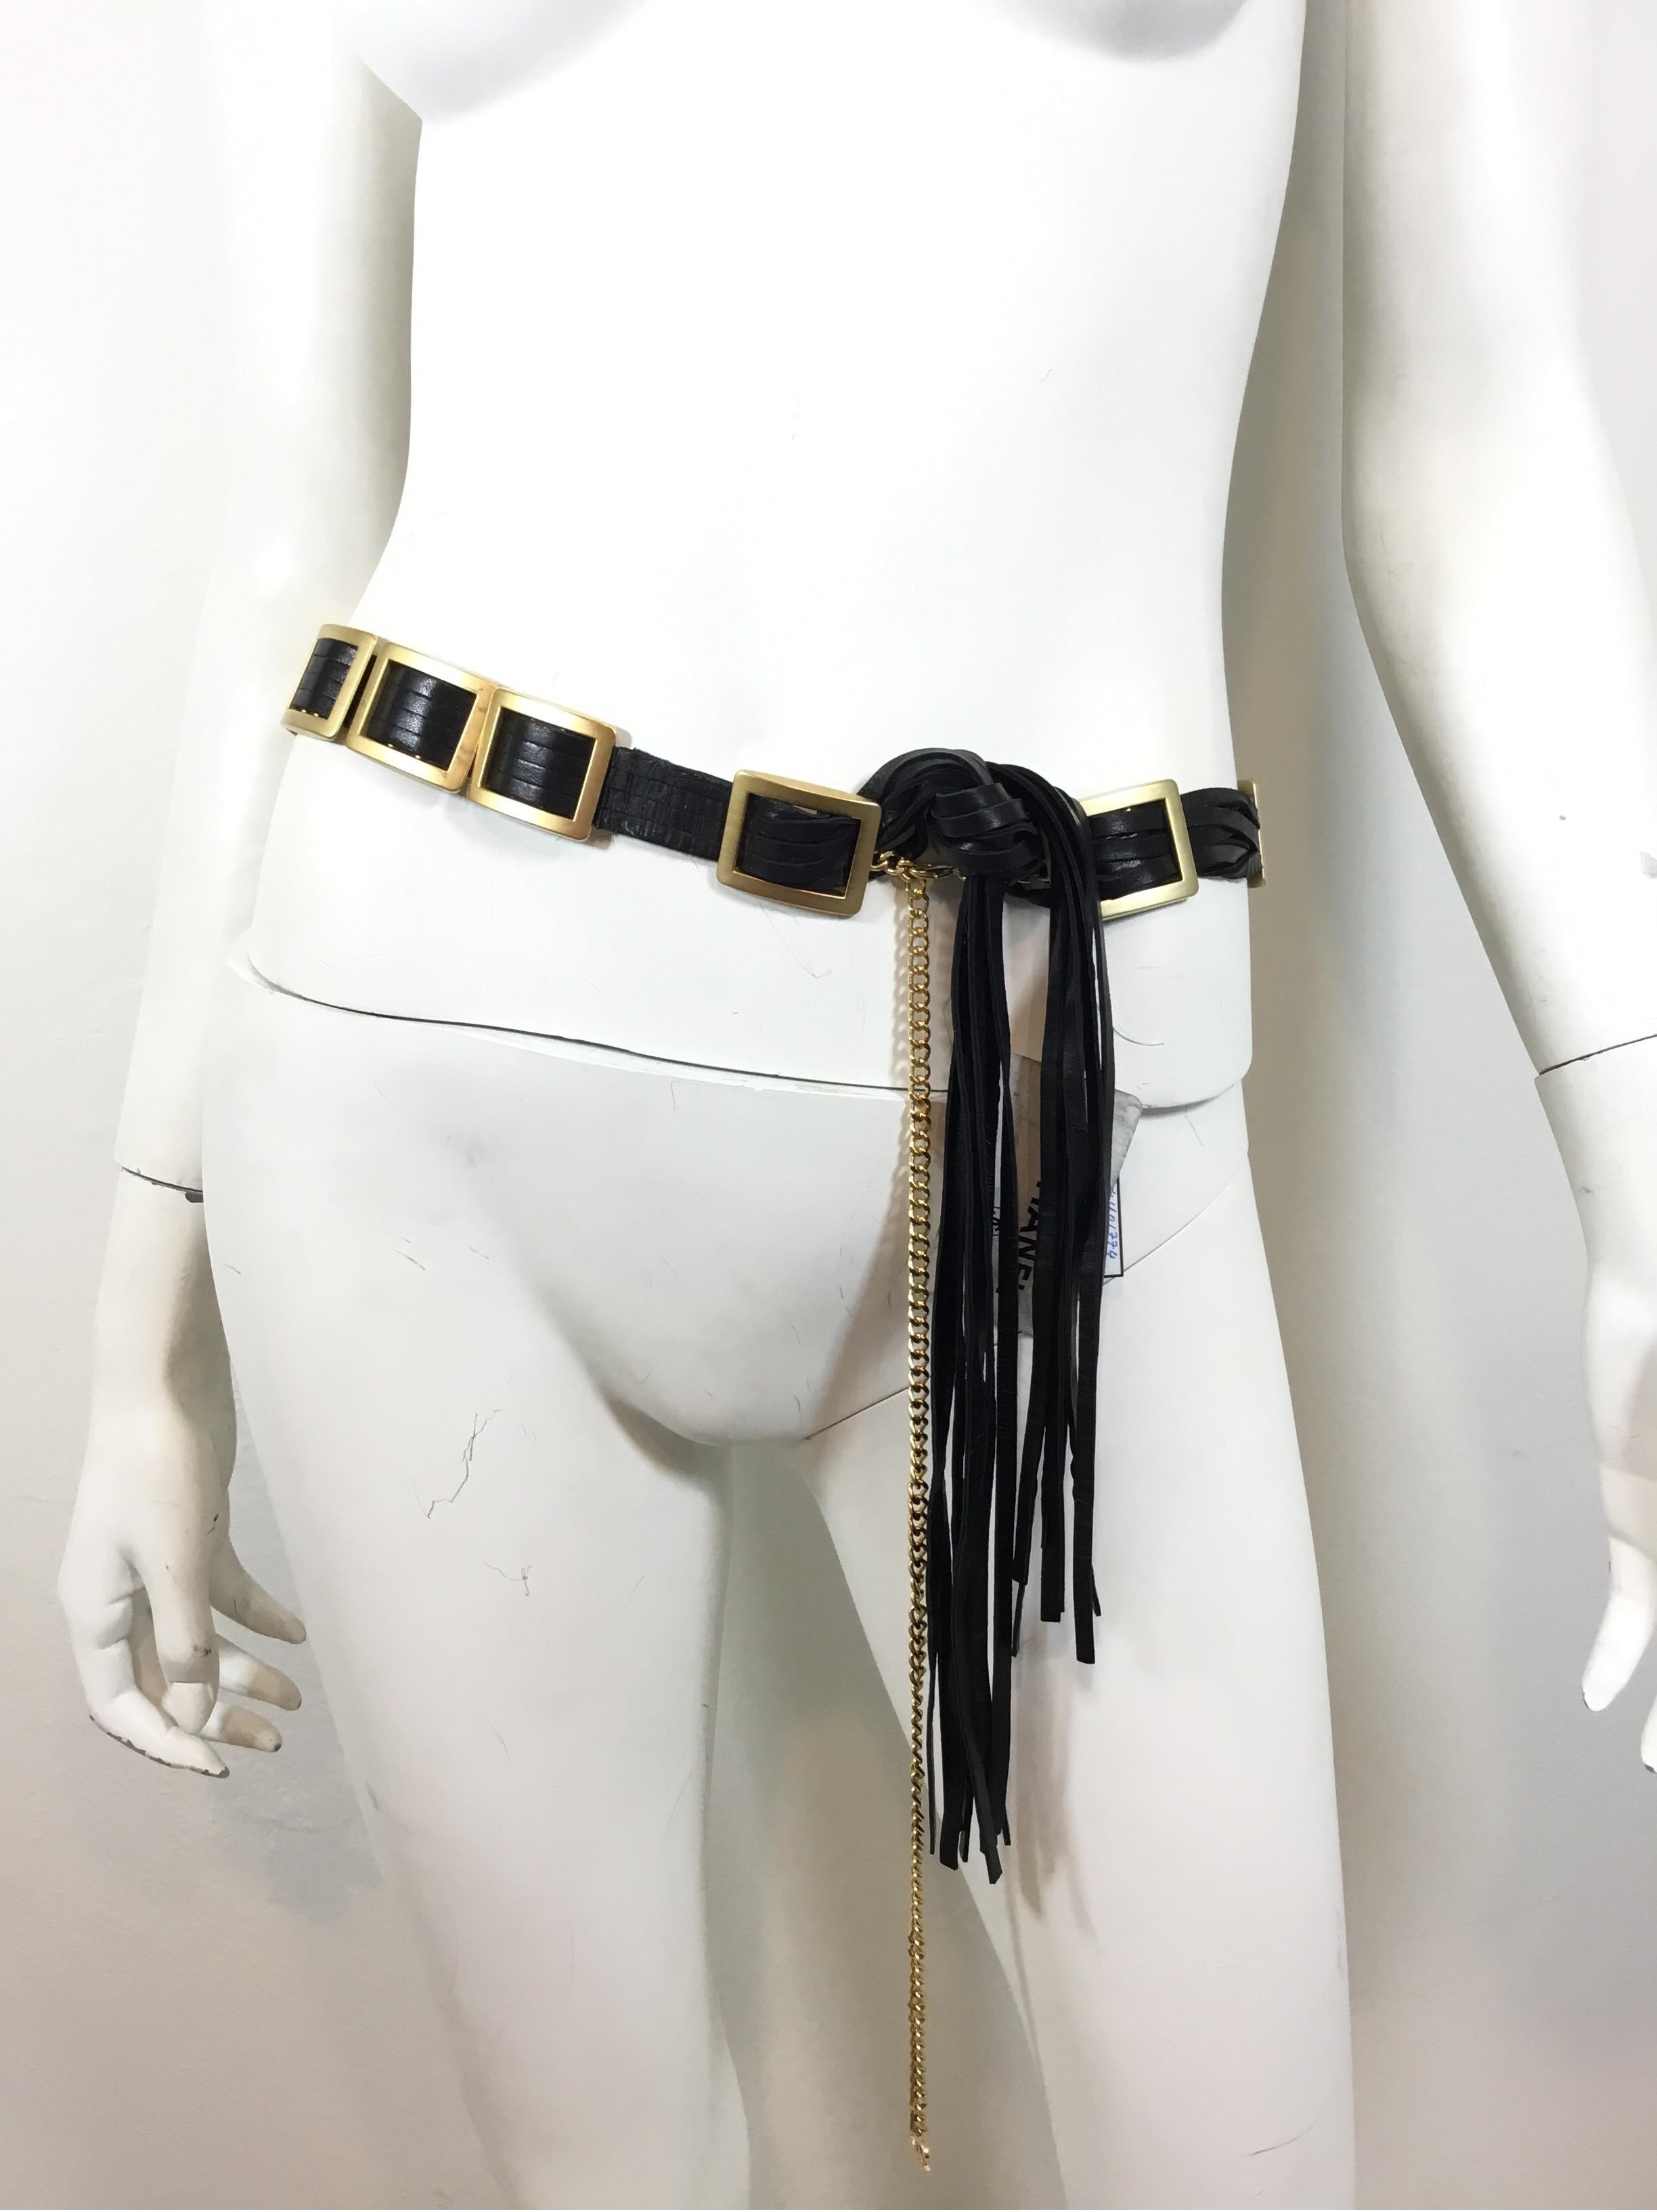 Chanel Black leather strand belt with goldtone metal plates, clip closure. Belt is brand new with tags and measures approximately 60 inches and 1 inch wide.